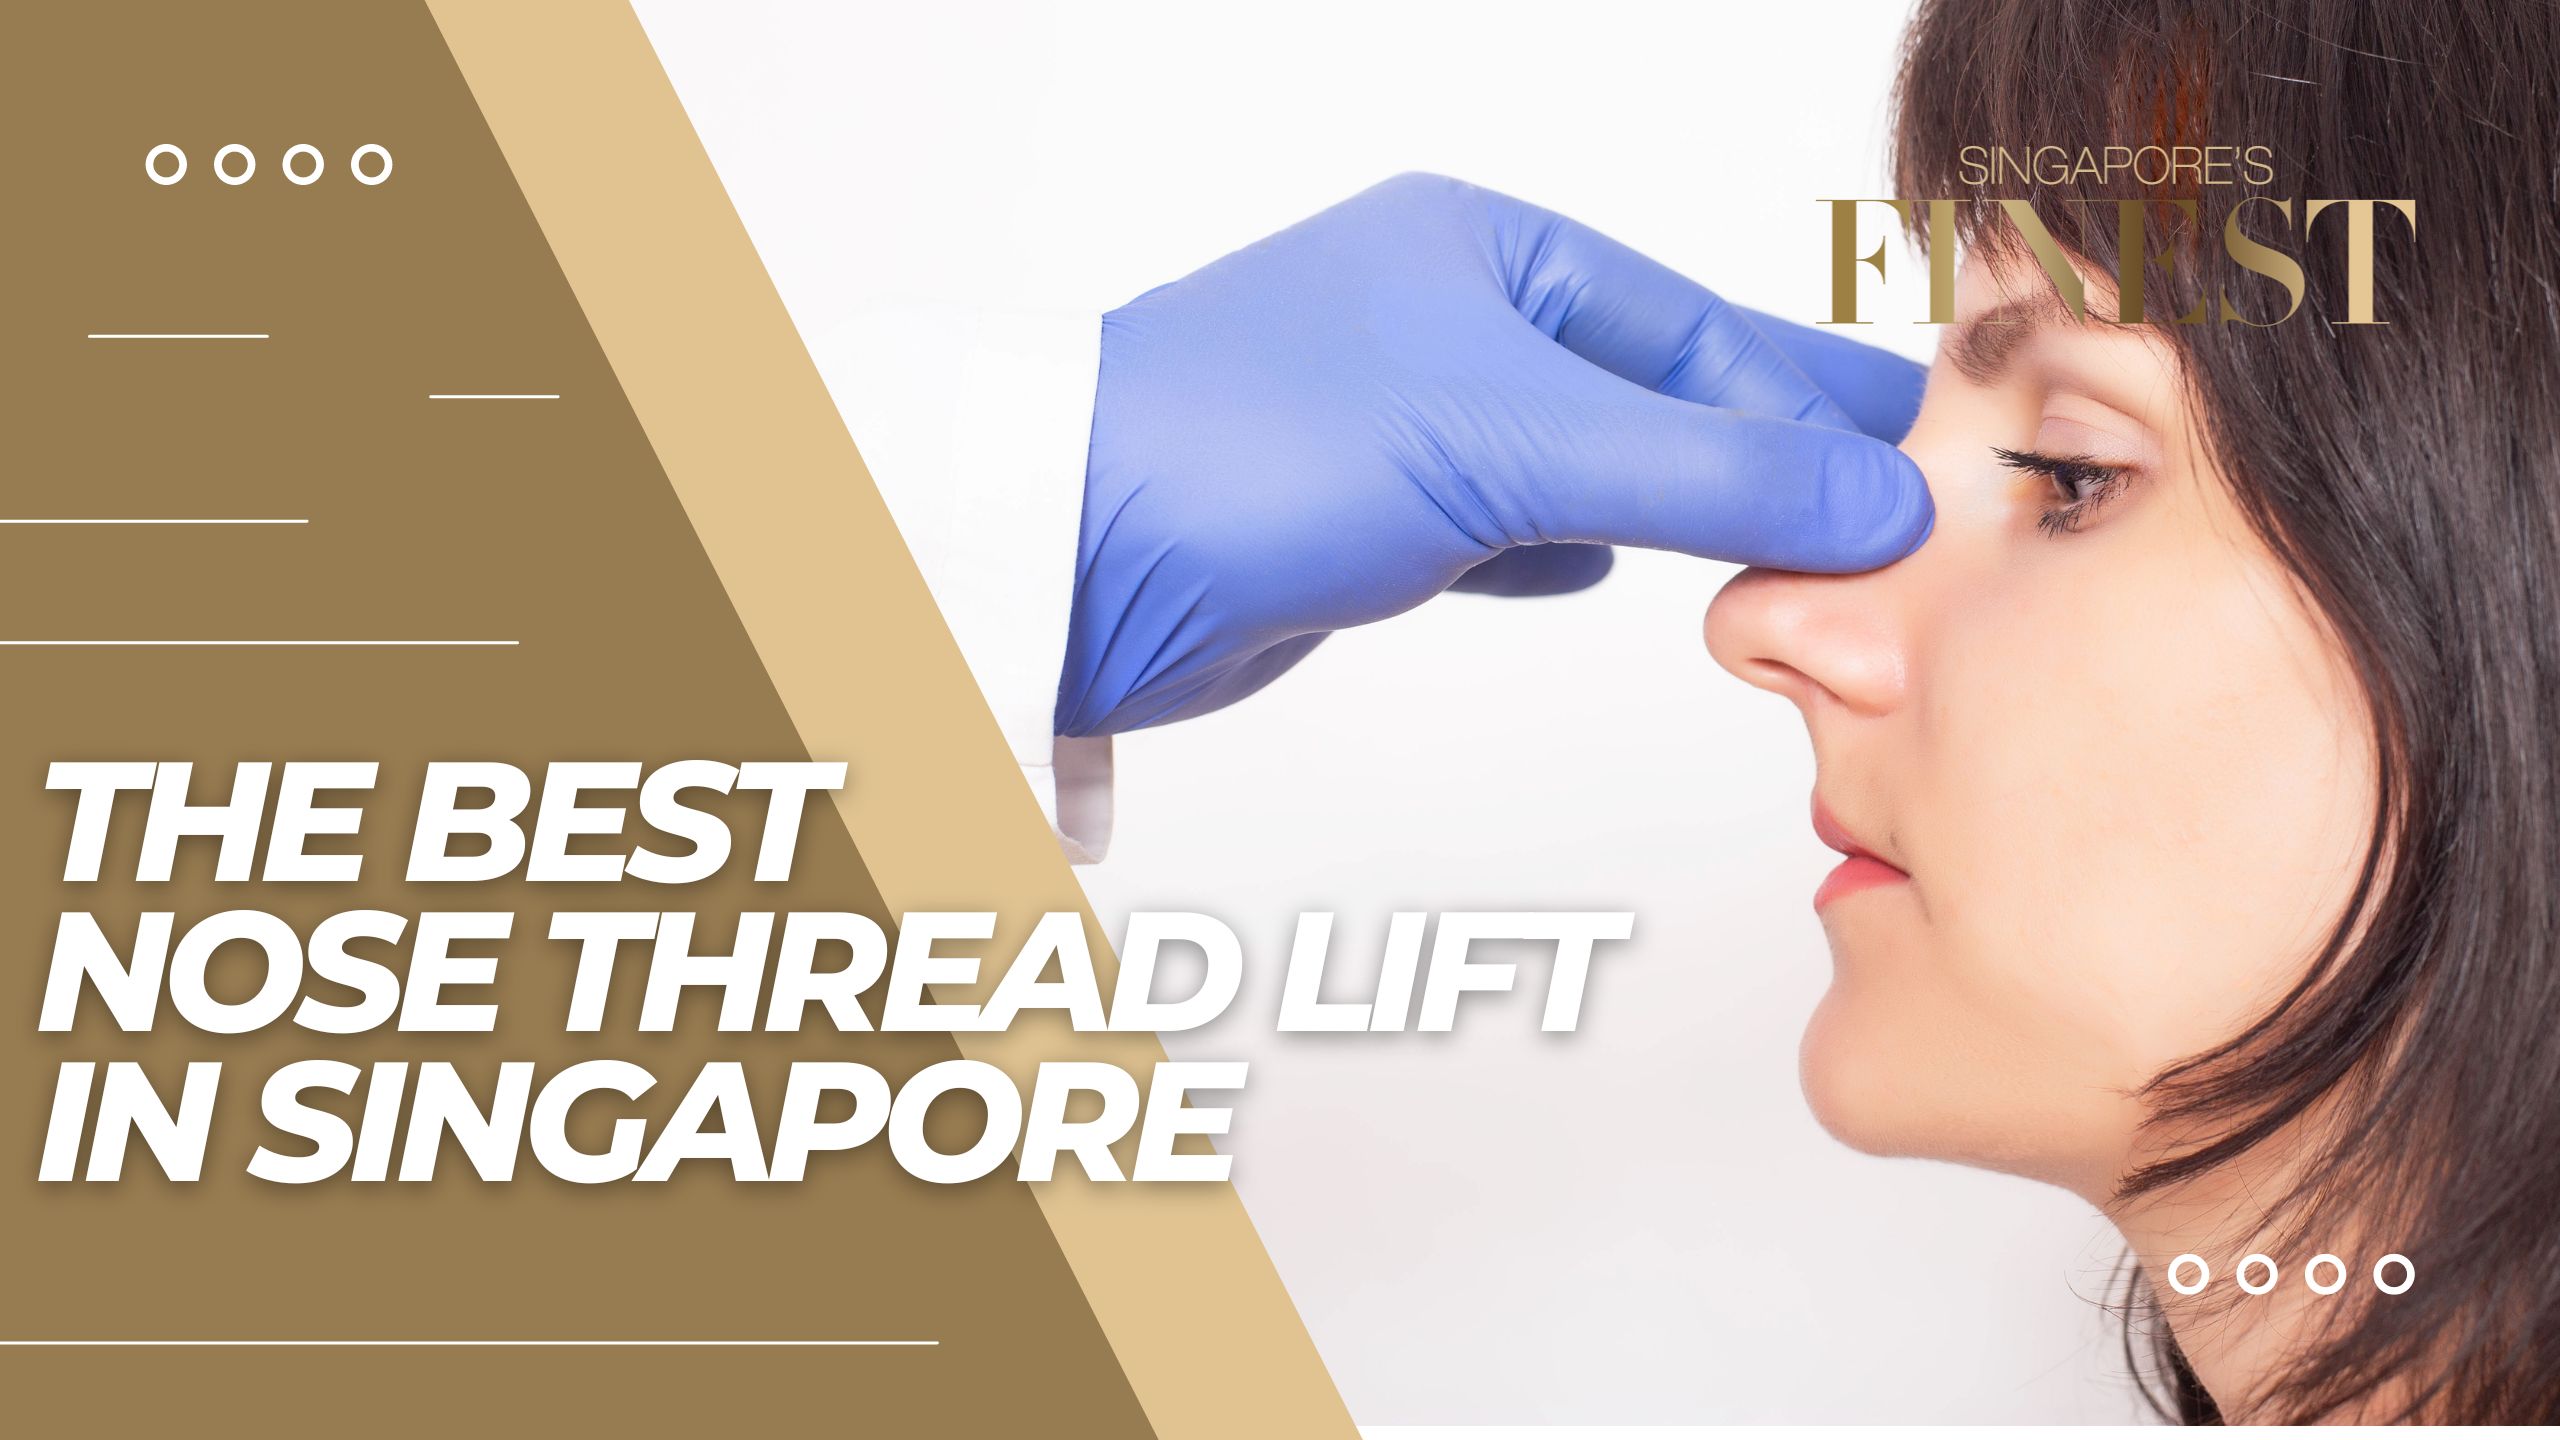 The Finest Nose Thread Lift in Singapore